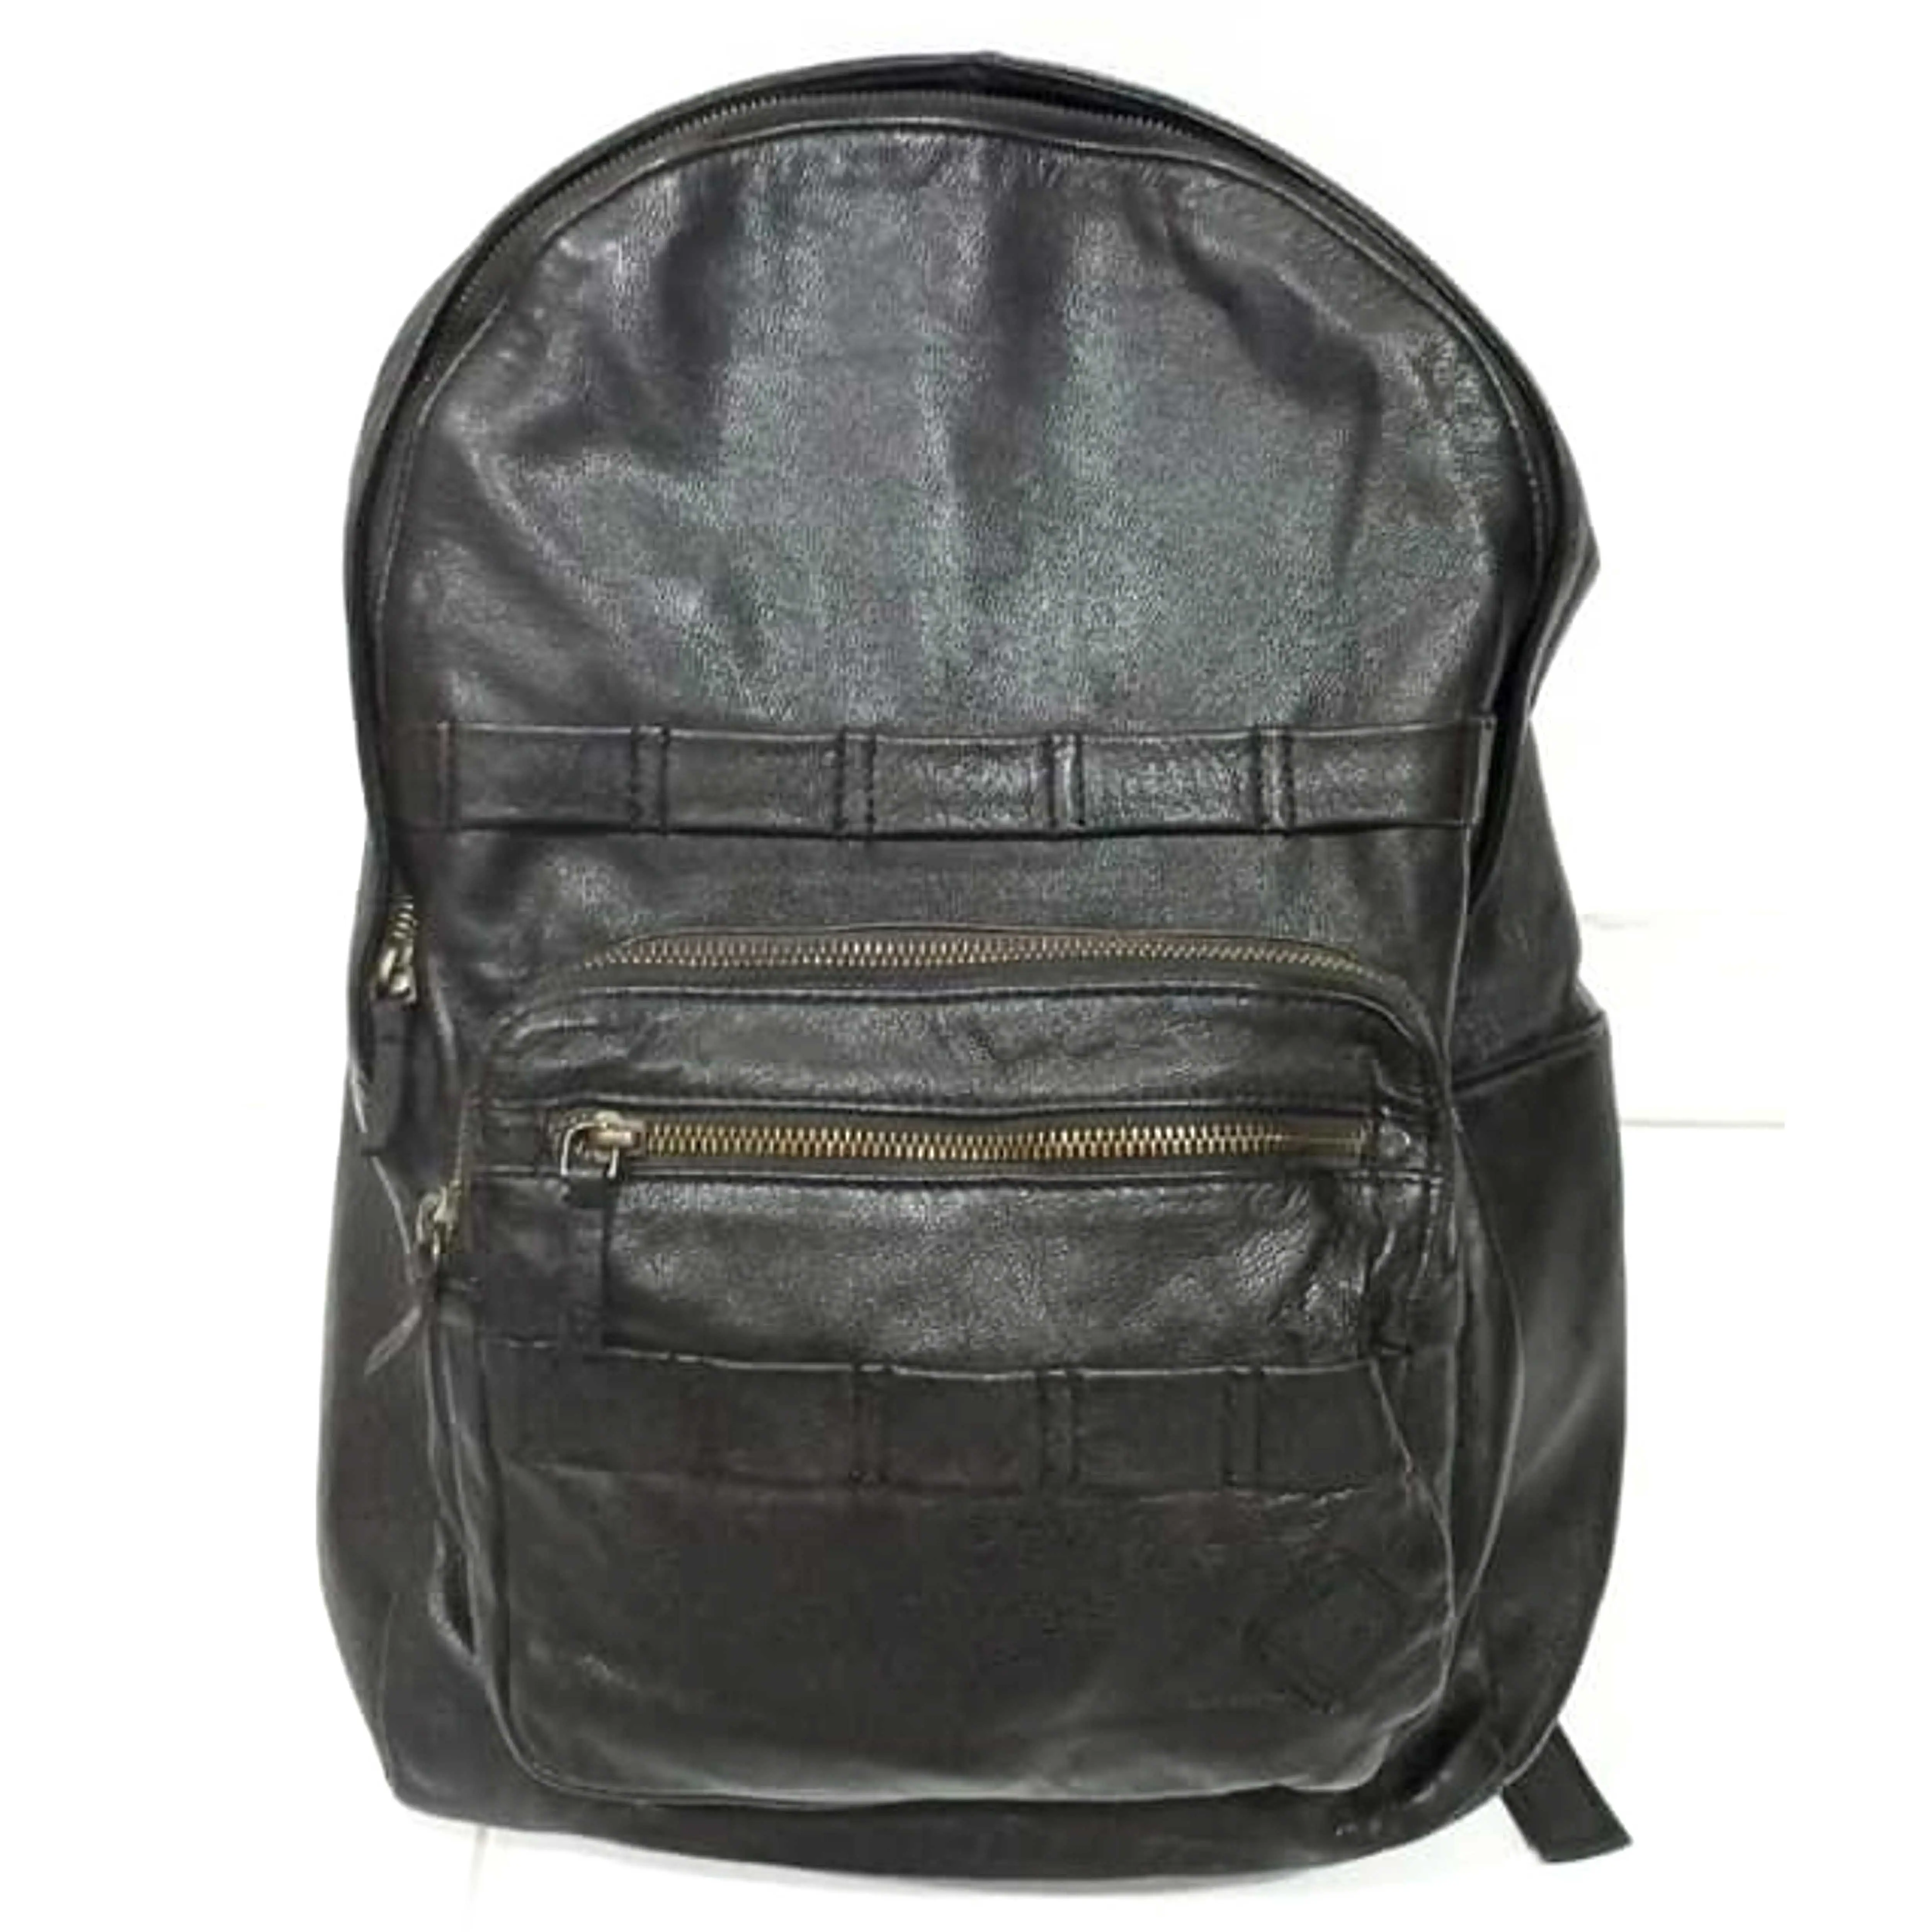 Wholesale Factory Made PU Leather Handmade Personalized School/College Bag for Men/Women for outdoor